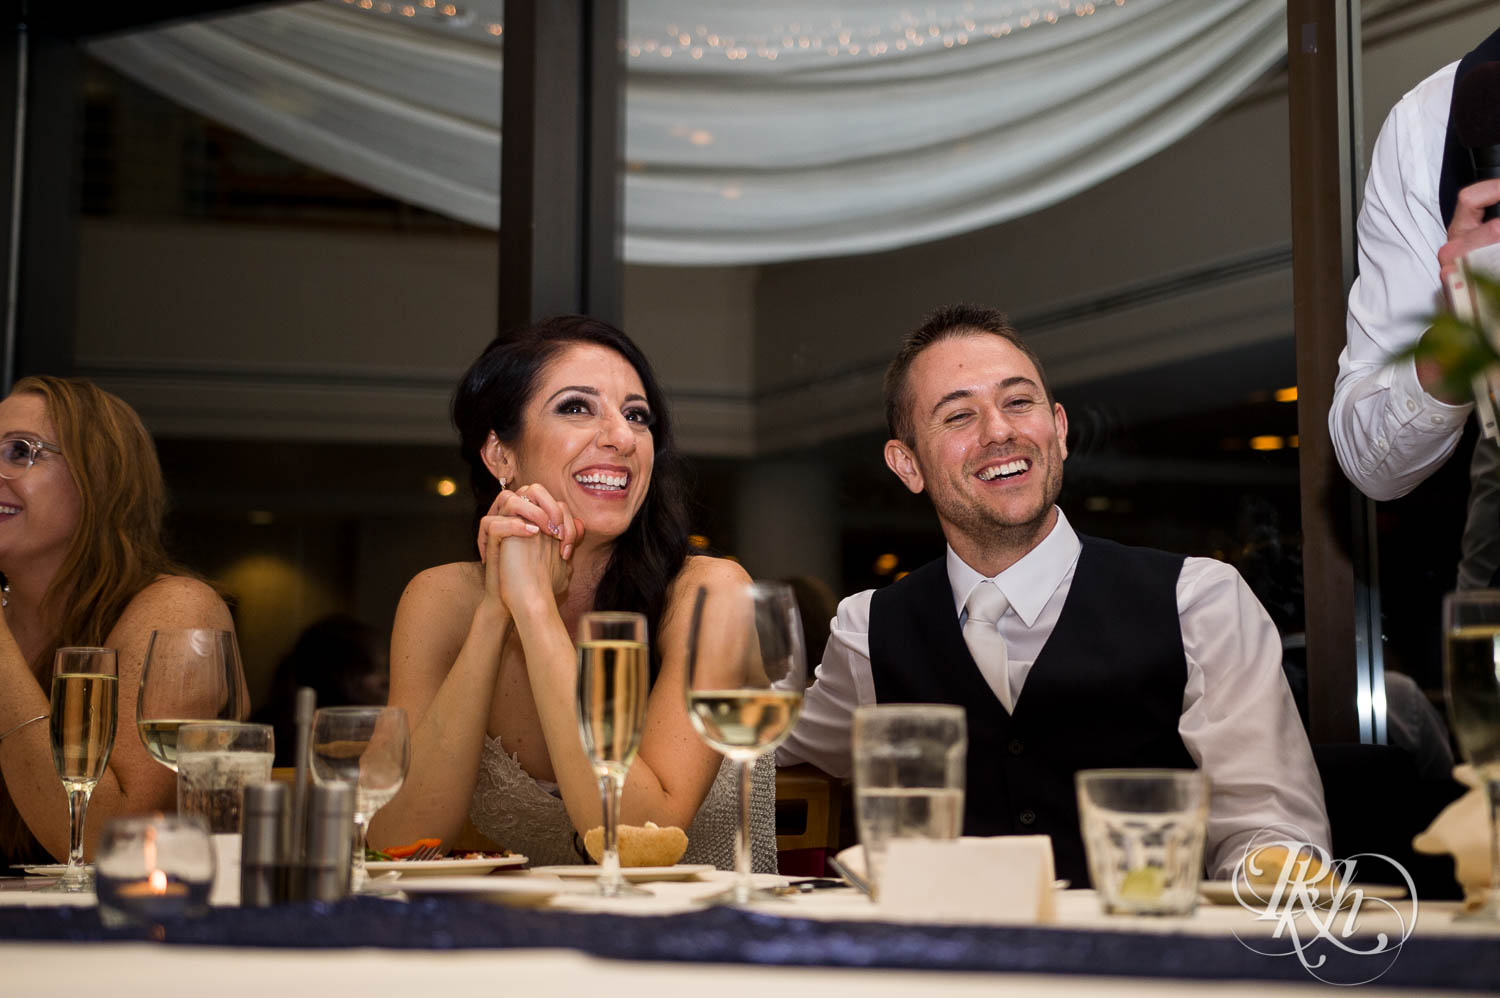 Bride and groom laugh during wedding reception in Chaska, Minnesota.